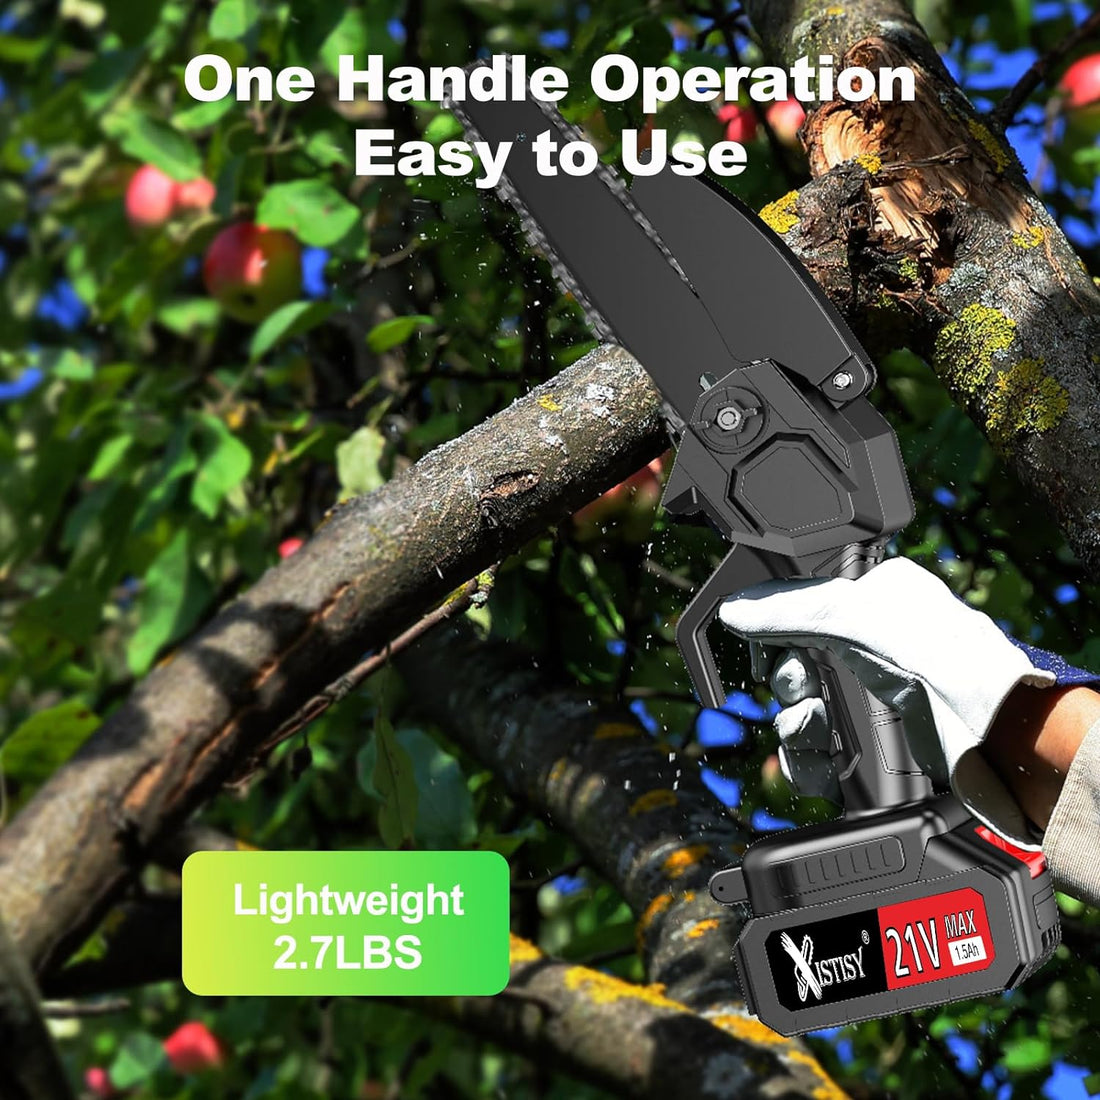 6-Inch Cordless Mini Chainsaw - Portable Electric Saw for Wood Cutting. Powerful Battery-Powered Handheld Chainsaw with Safety Lock. Ideal for Tree Trimming Courtyard Household Garden